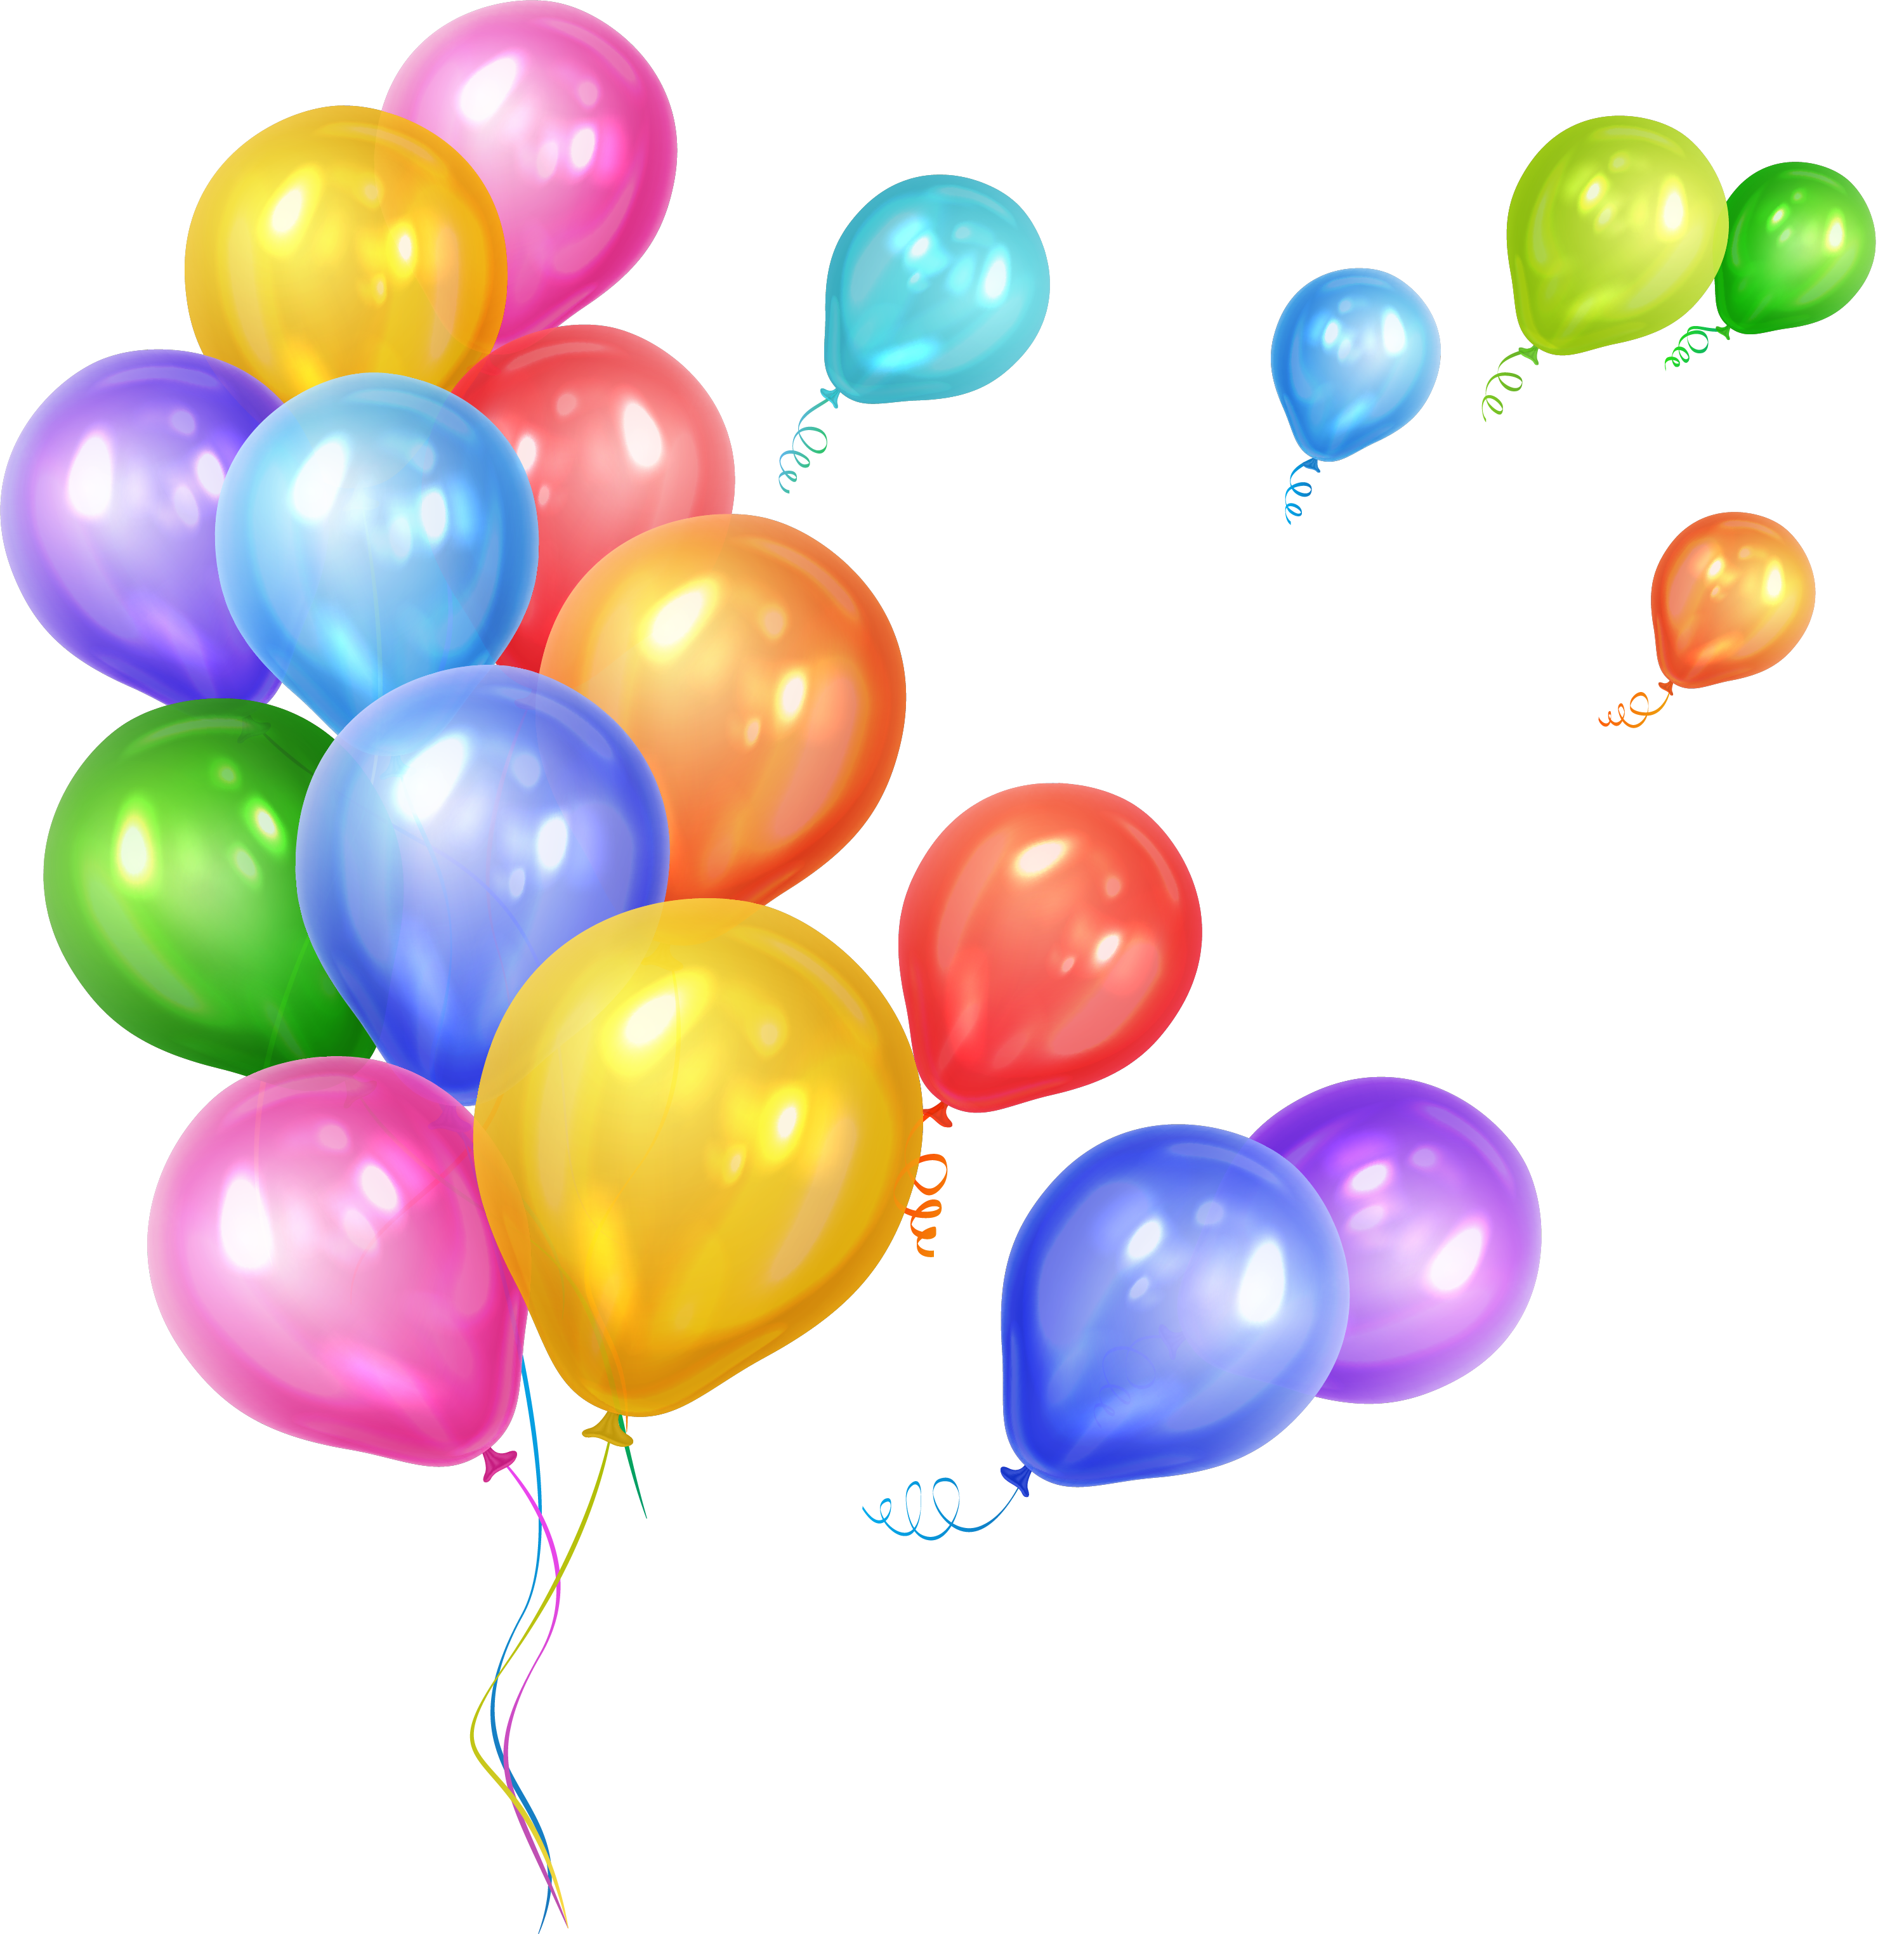 kisspng-gas-balloon-party-birthday-colorful-dream-balloon-5a9c0809f337f8.7603221815201751139962